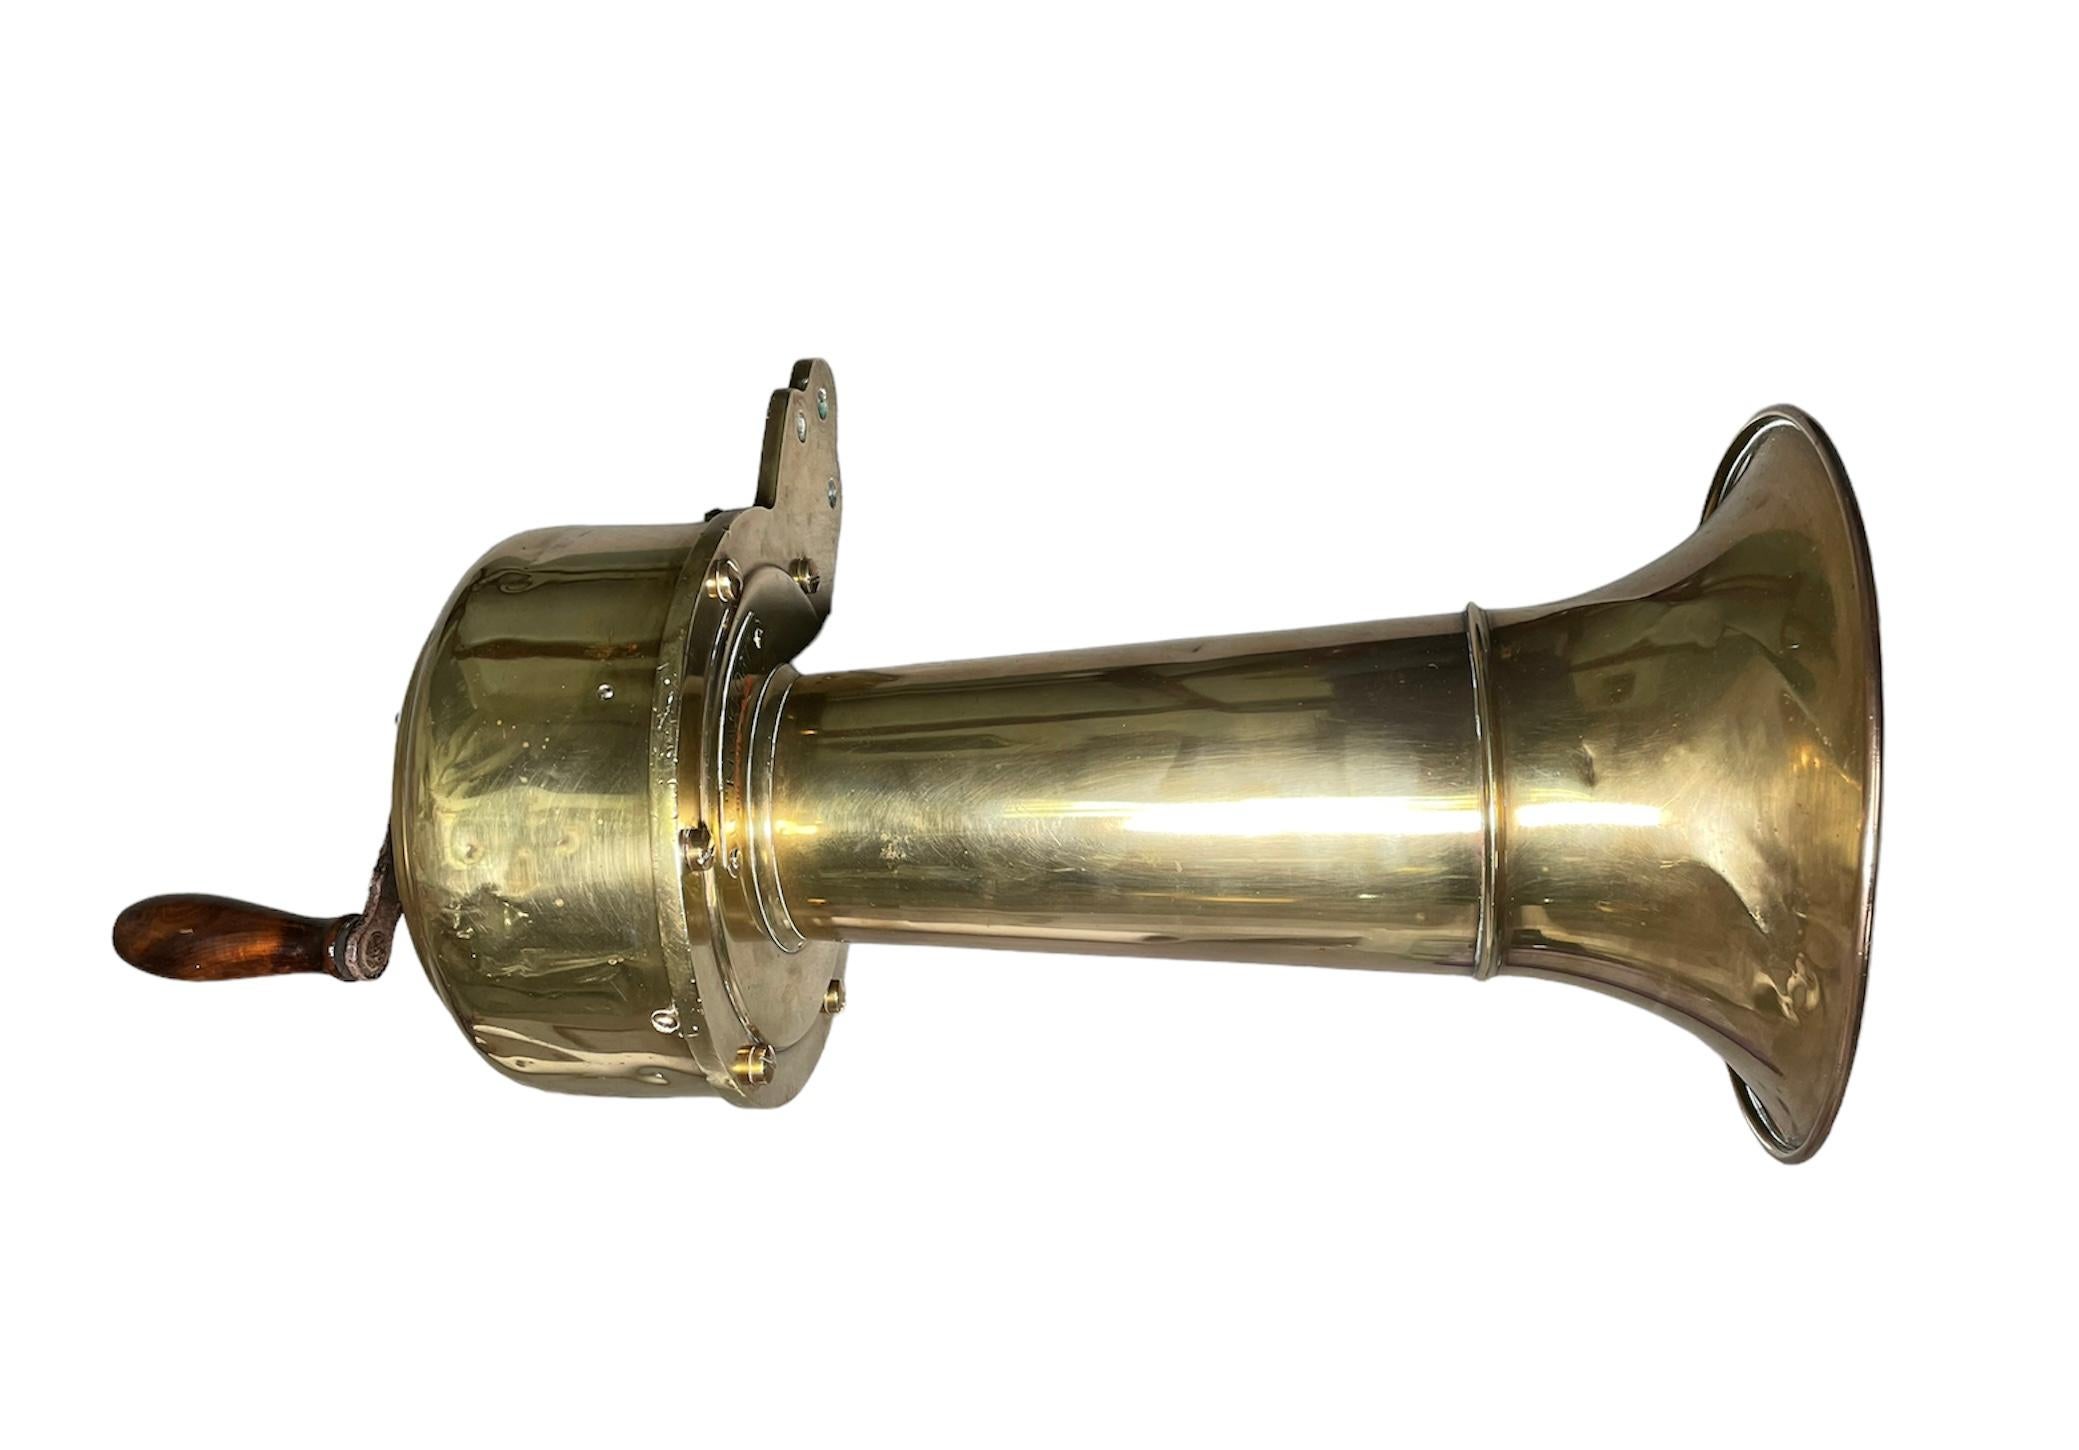 Other Early 20th Century French Brass Klaxon Horn